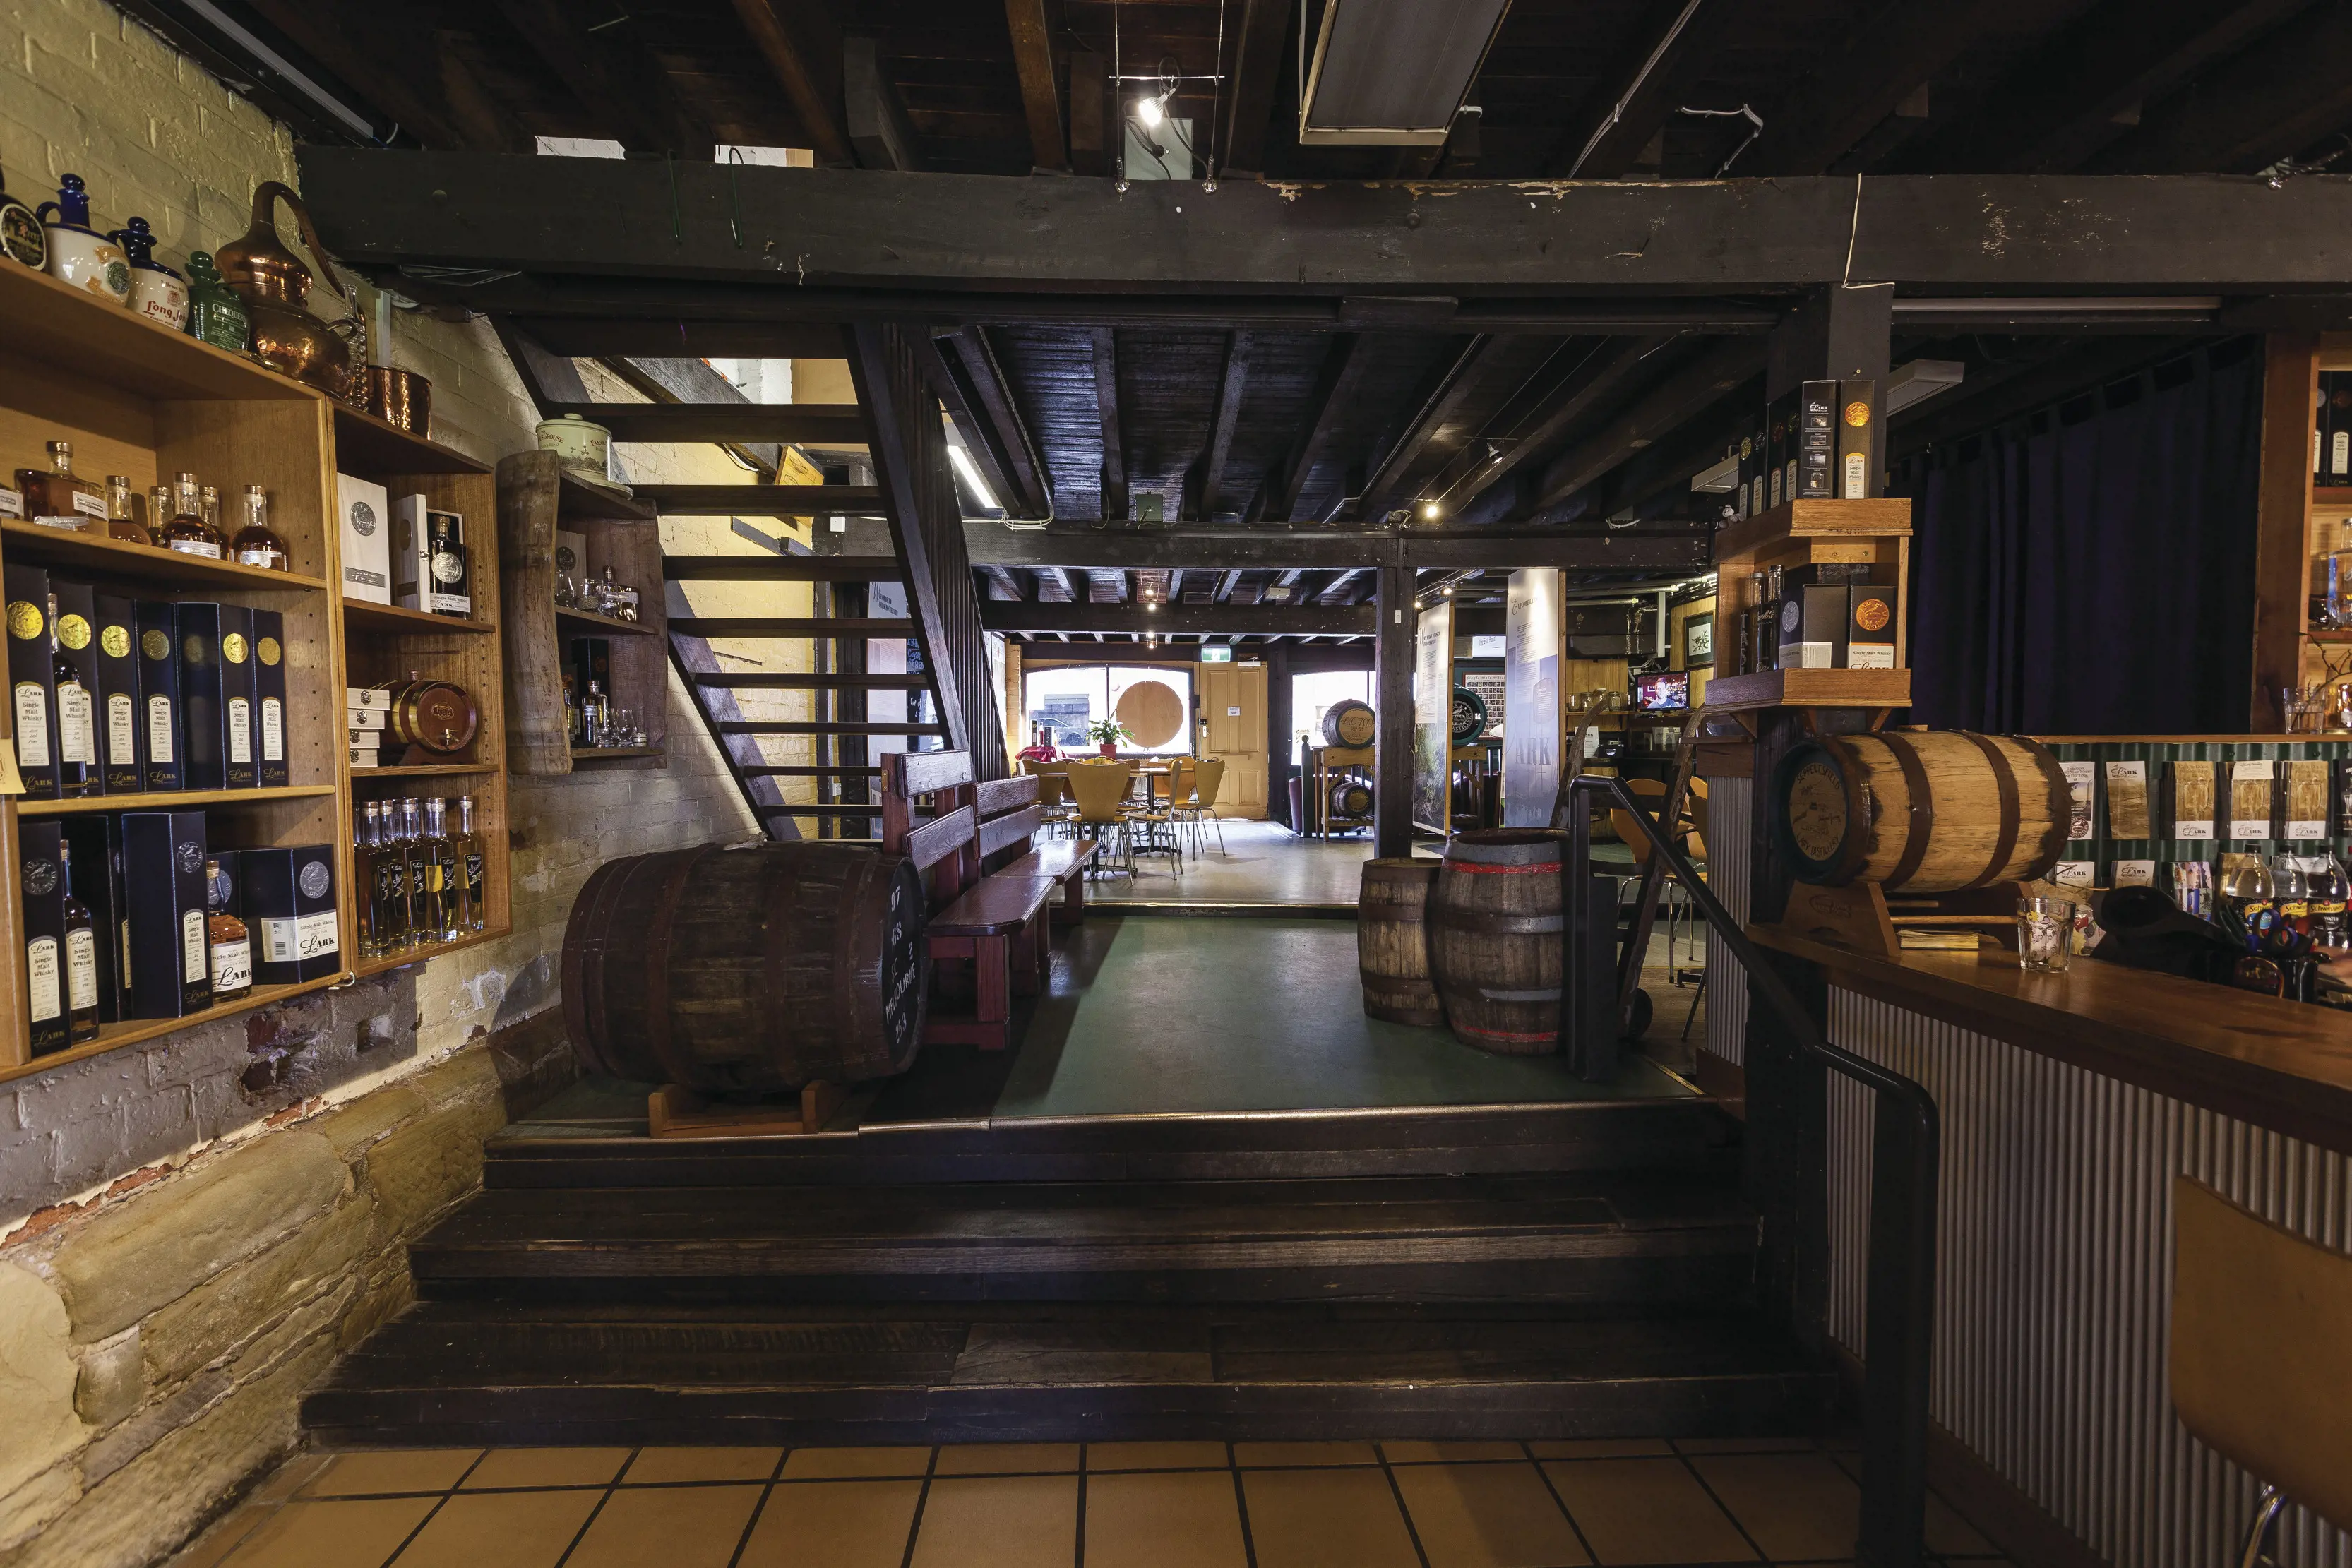 inside the charming and rustic Lark Distillery, surrounded by wooden interior and large barrels.